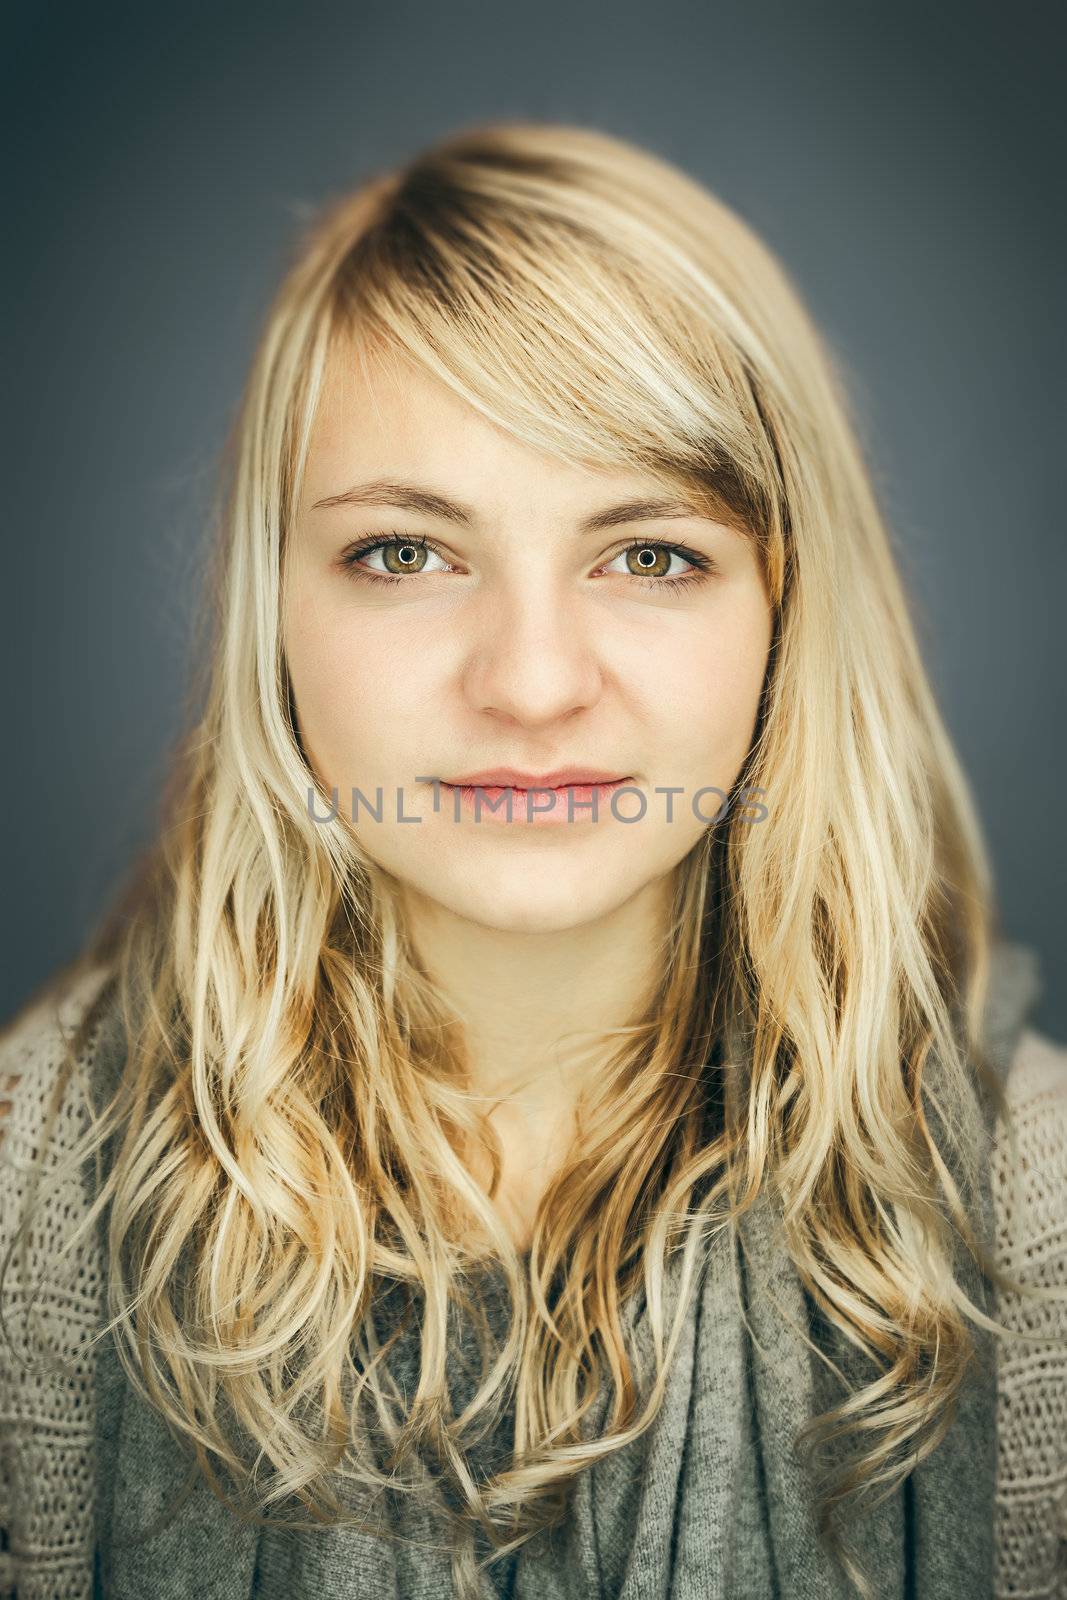 An image of a beautiful blond girl